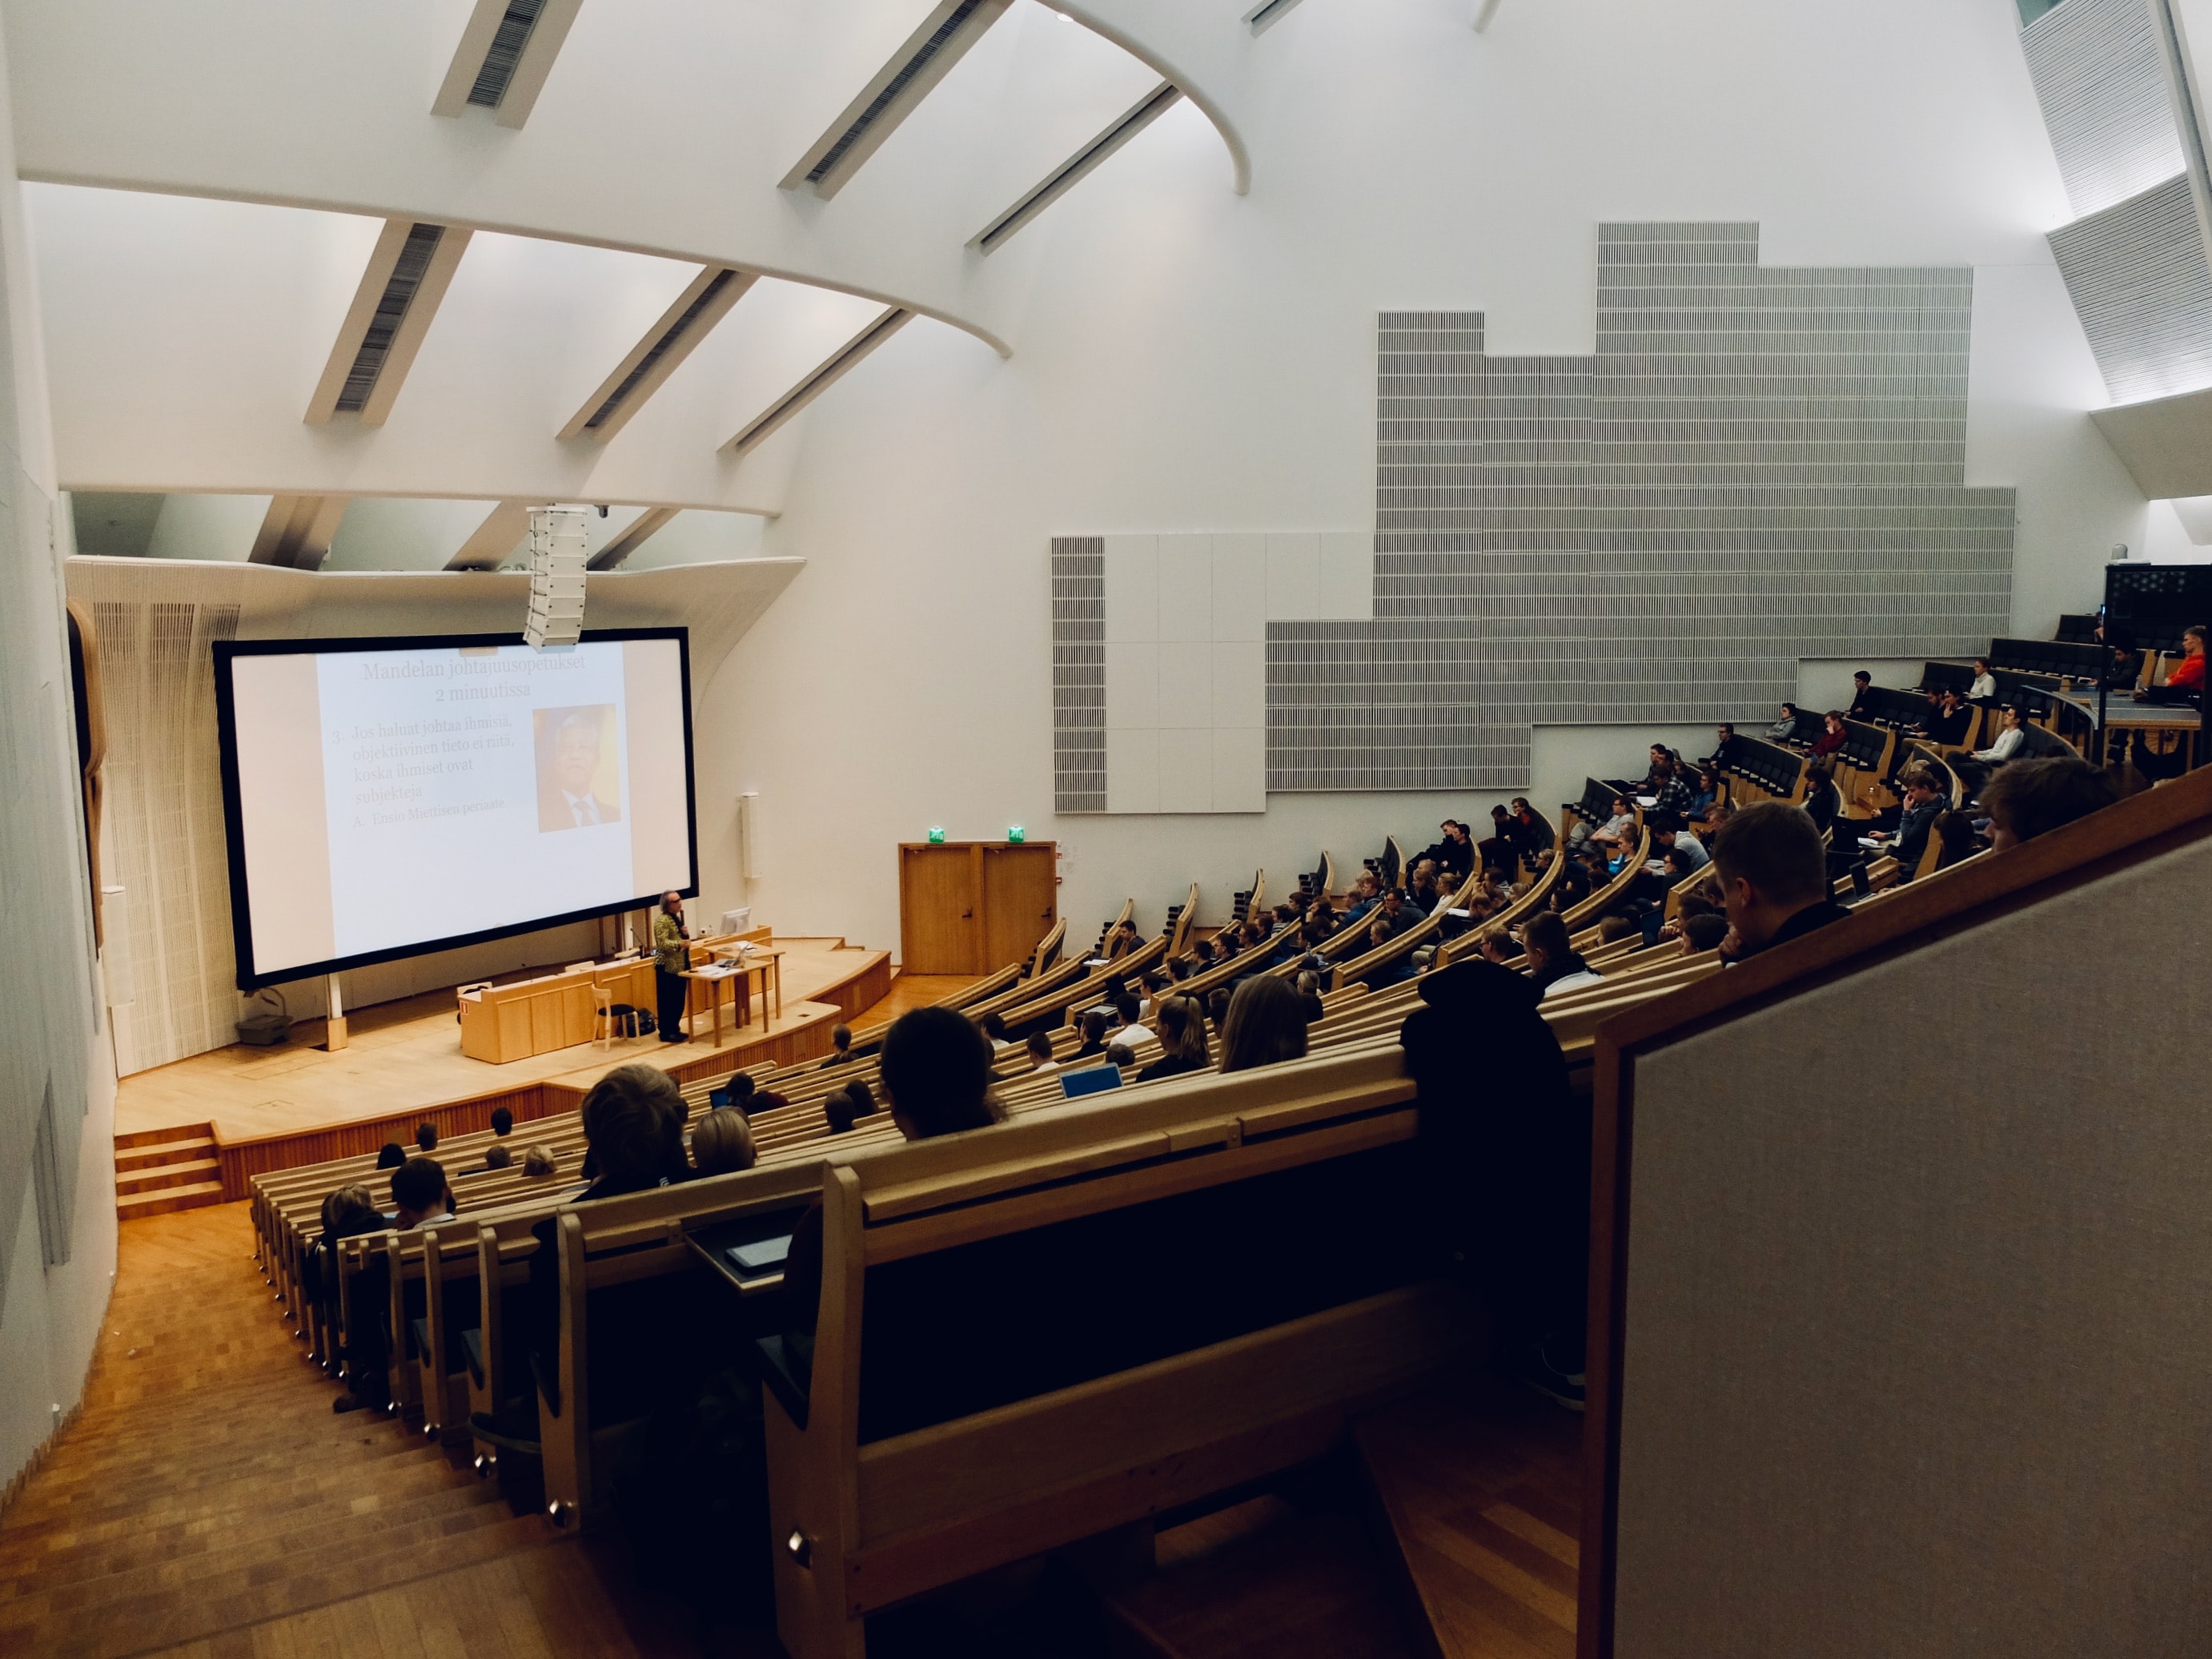 Large modern lecture hall with presenter at the front and students in the audience